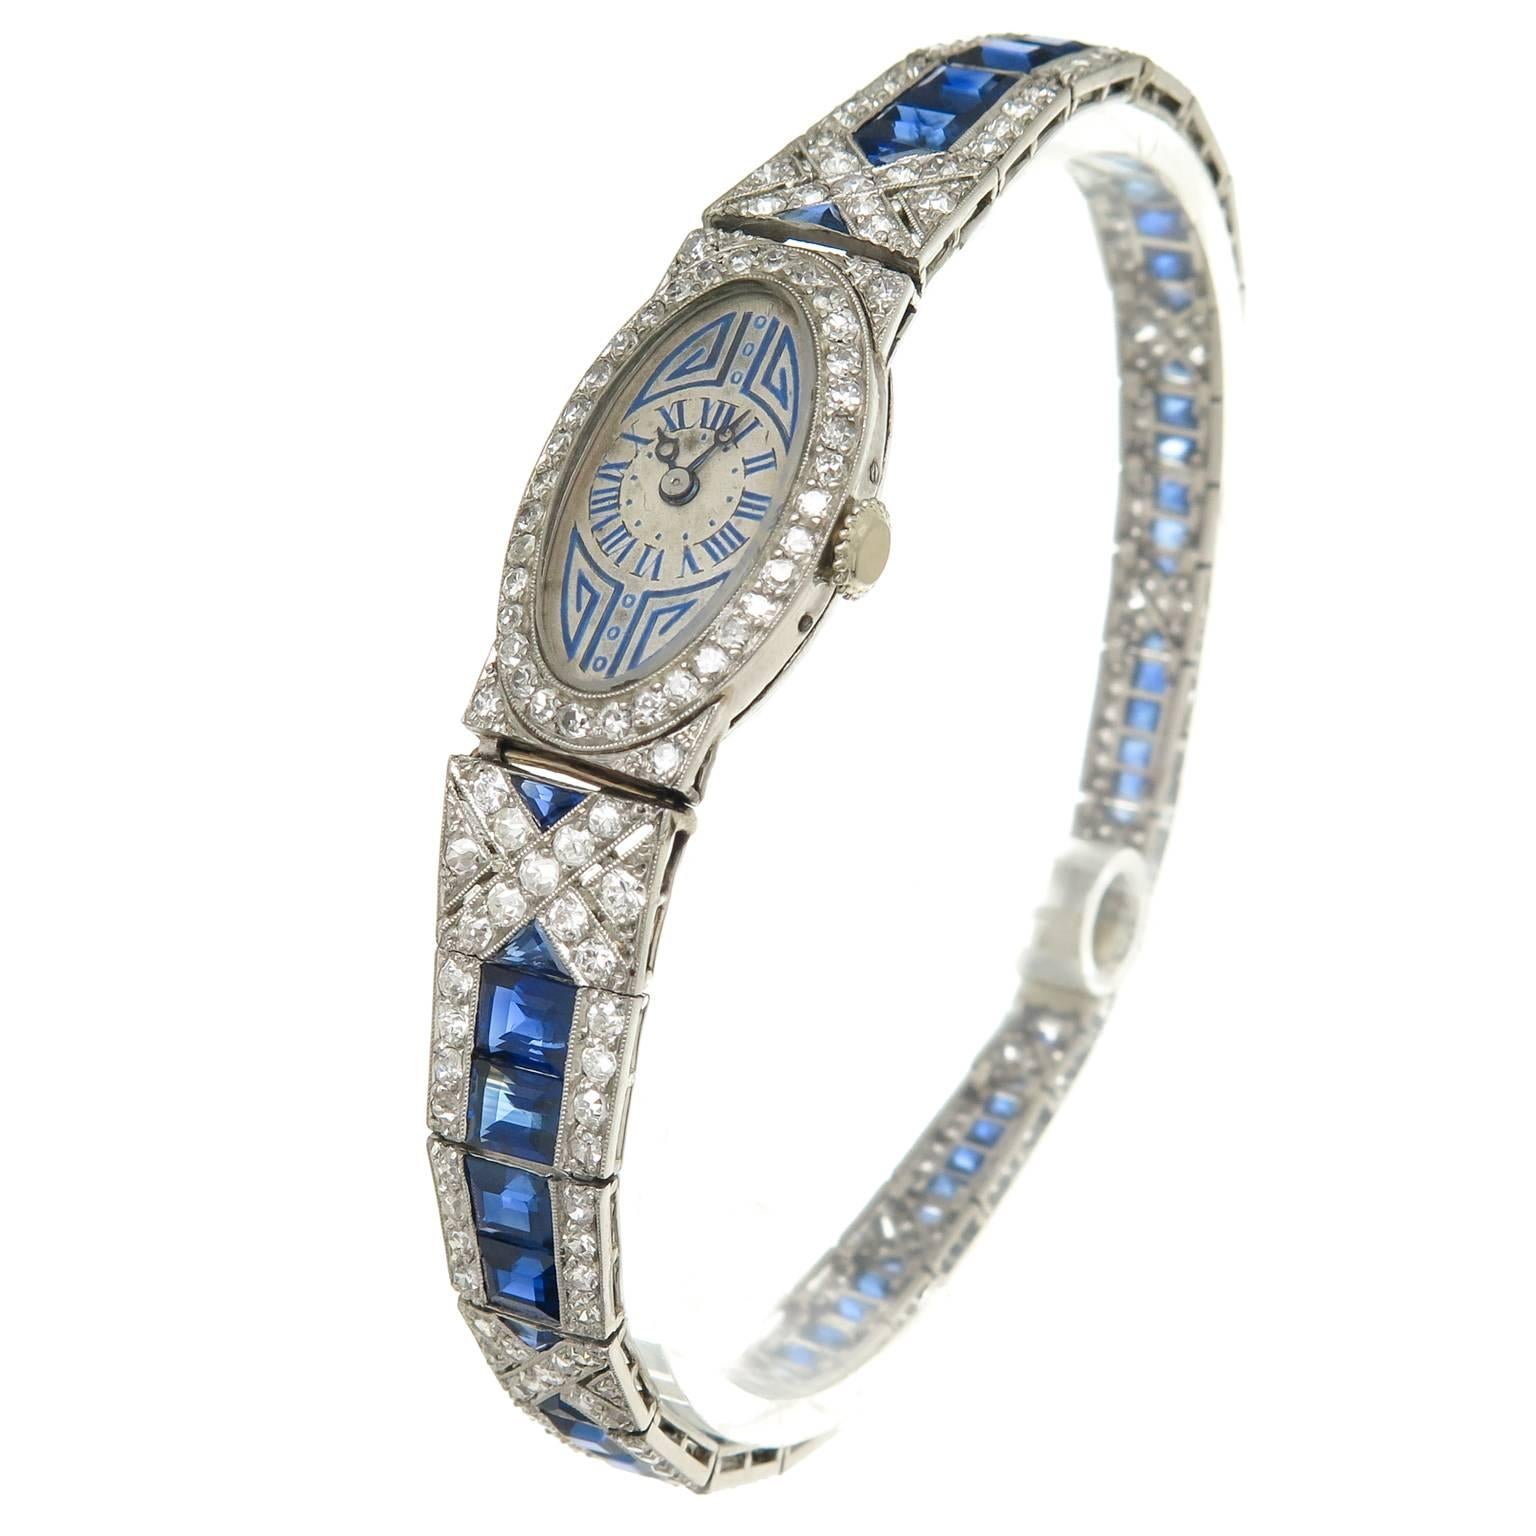 Circa 1930 Platinum Bracelet Watch, set with European cut Diamonds totaling approximately 3 Carats and further set with Natural, very fine Color Triangle and square cut Sapphires totaling approximately 4 Carats. The watch measures 7 3/8 inch in